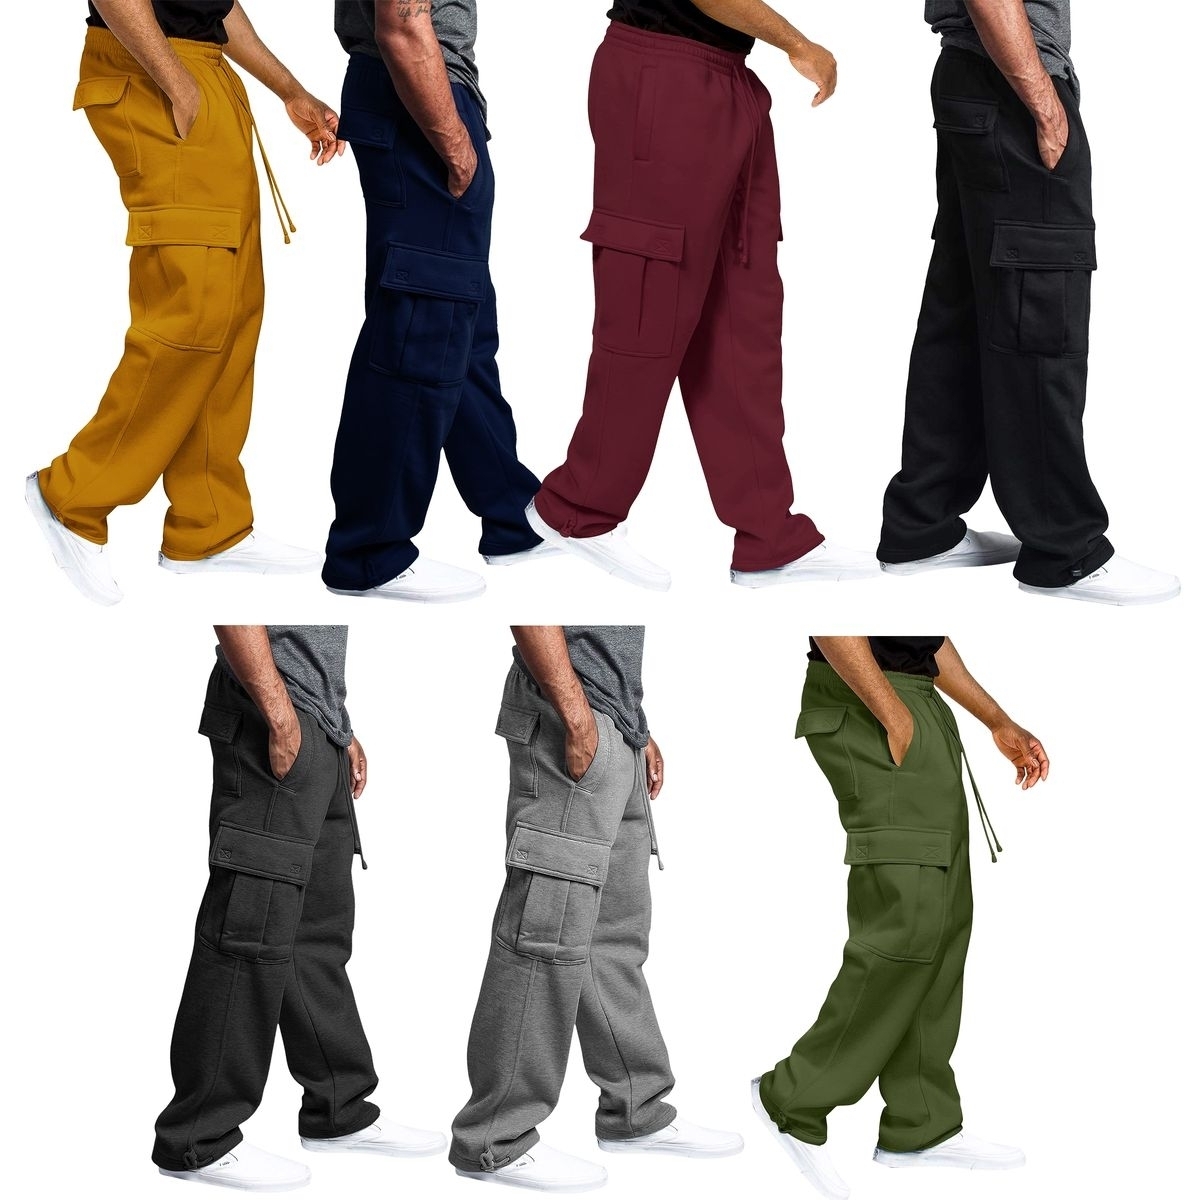 3-Pack: Men's Casual Solid Fleece Lined Cargo Jogger Sweatpants With Pockets - Large